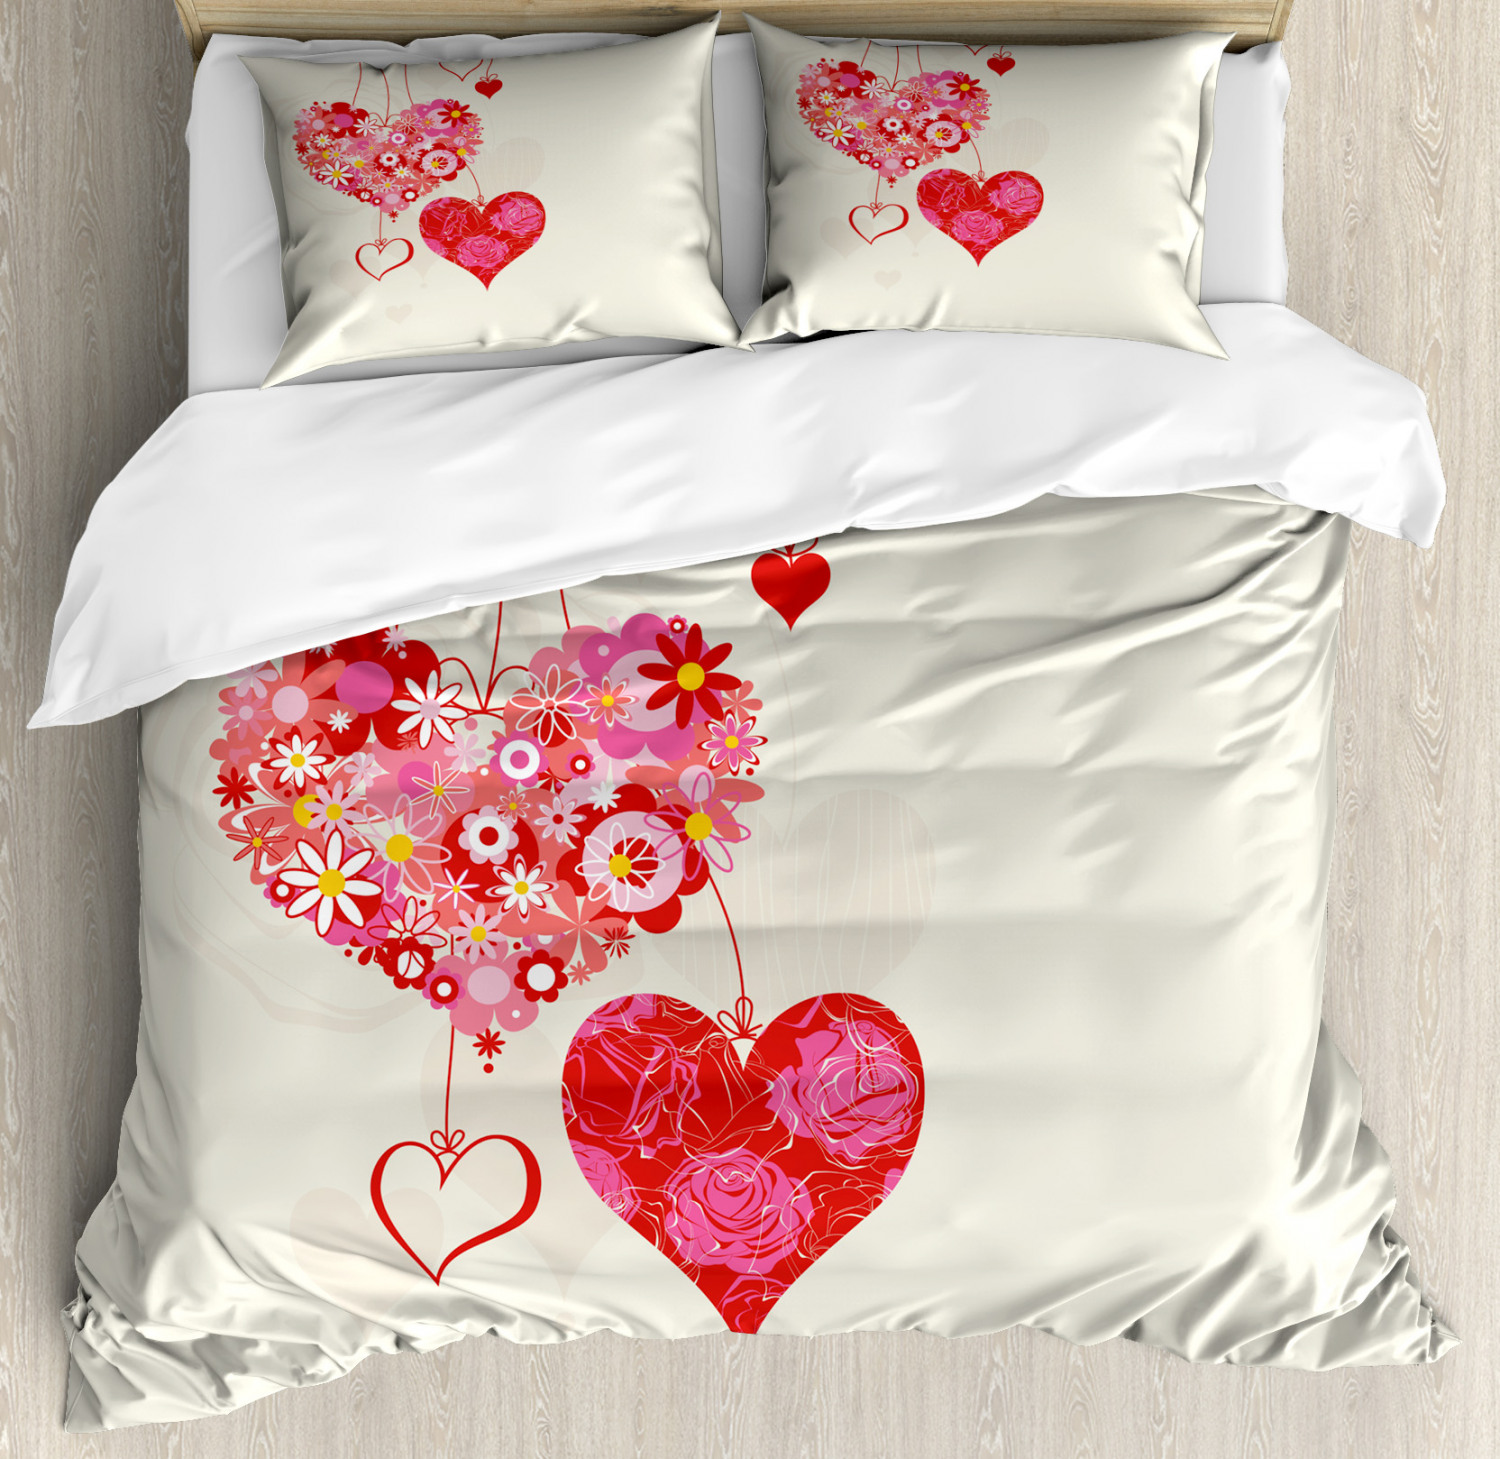 Love Duvet Cover Set Twin Queen King Sizes with Pillow Shams Bedding